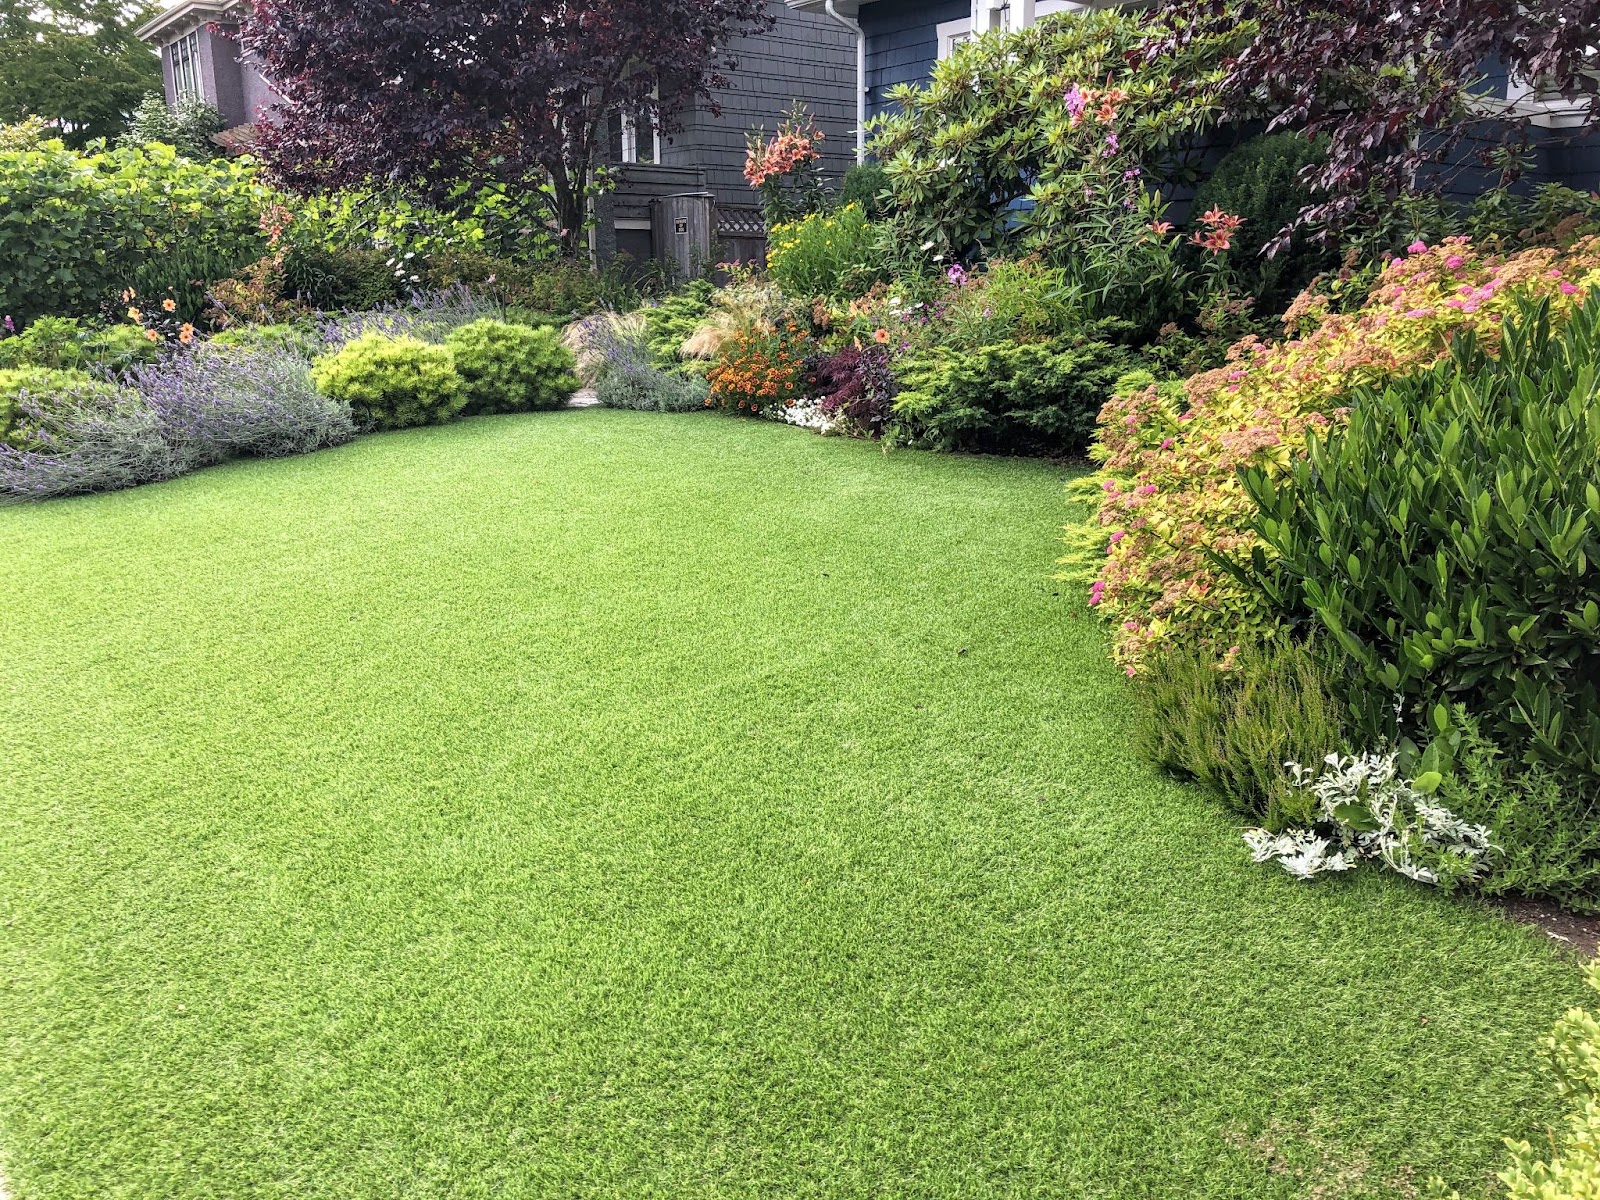 How long does artificial turf last in yards